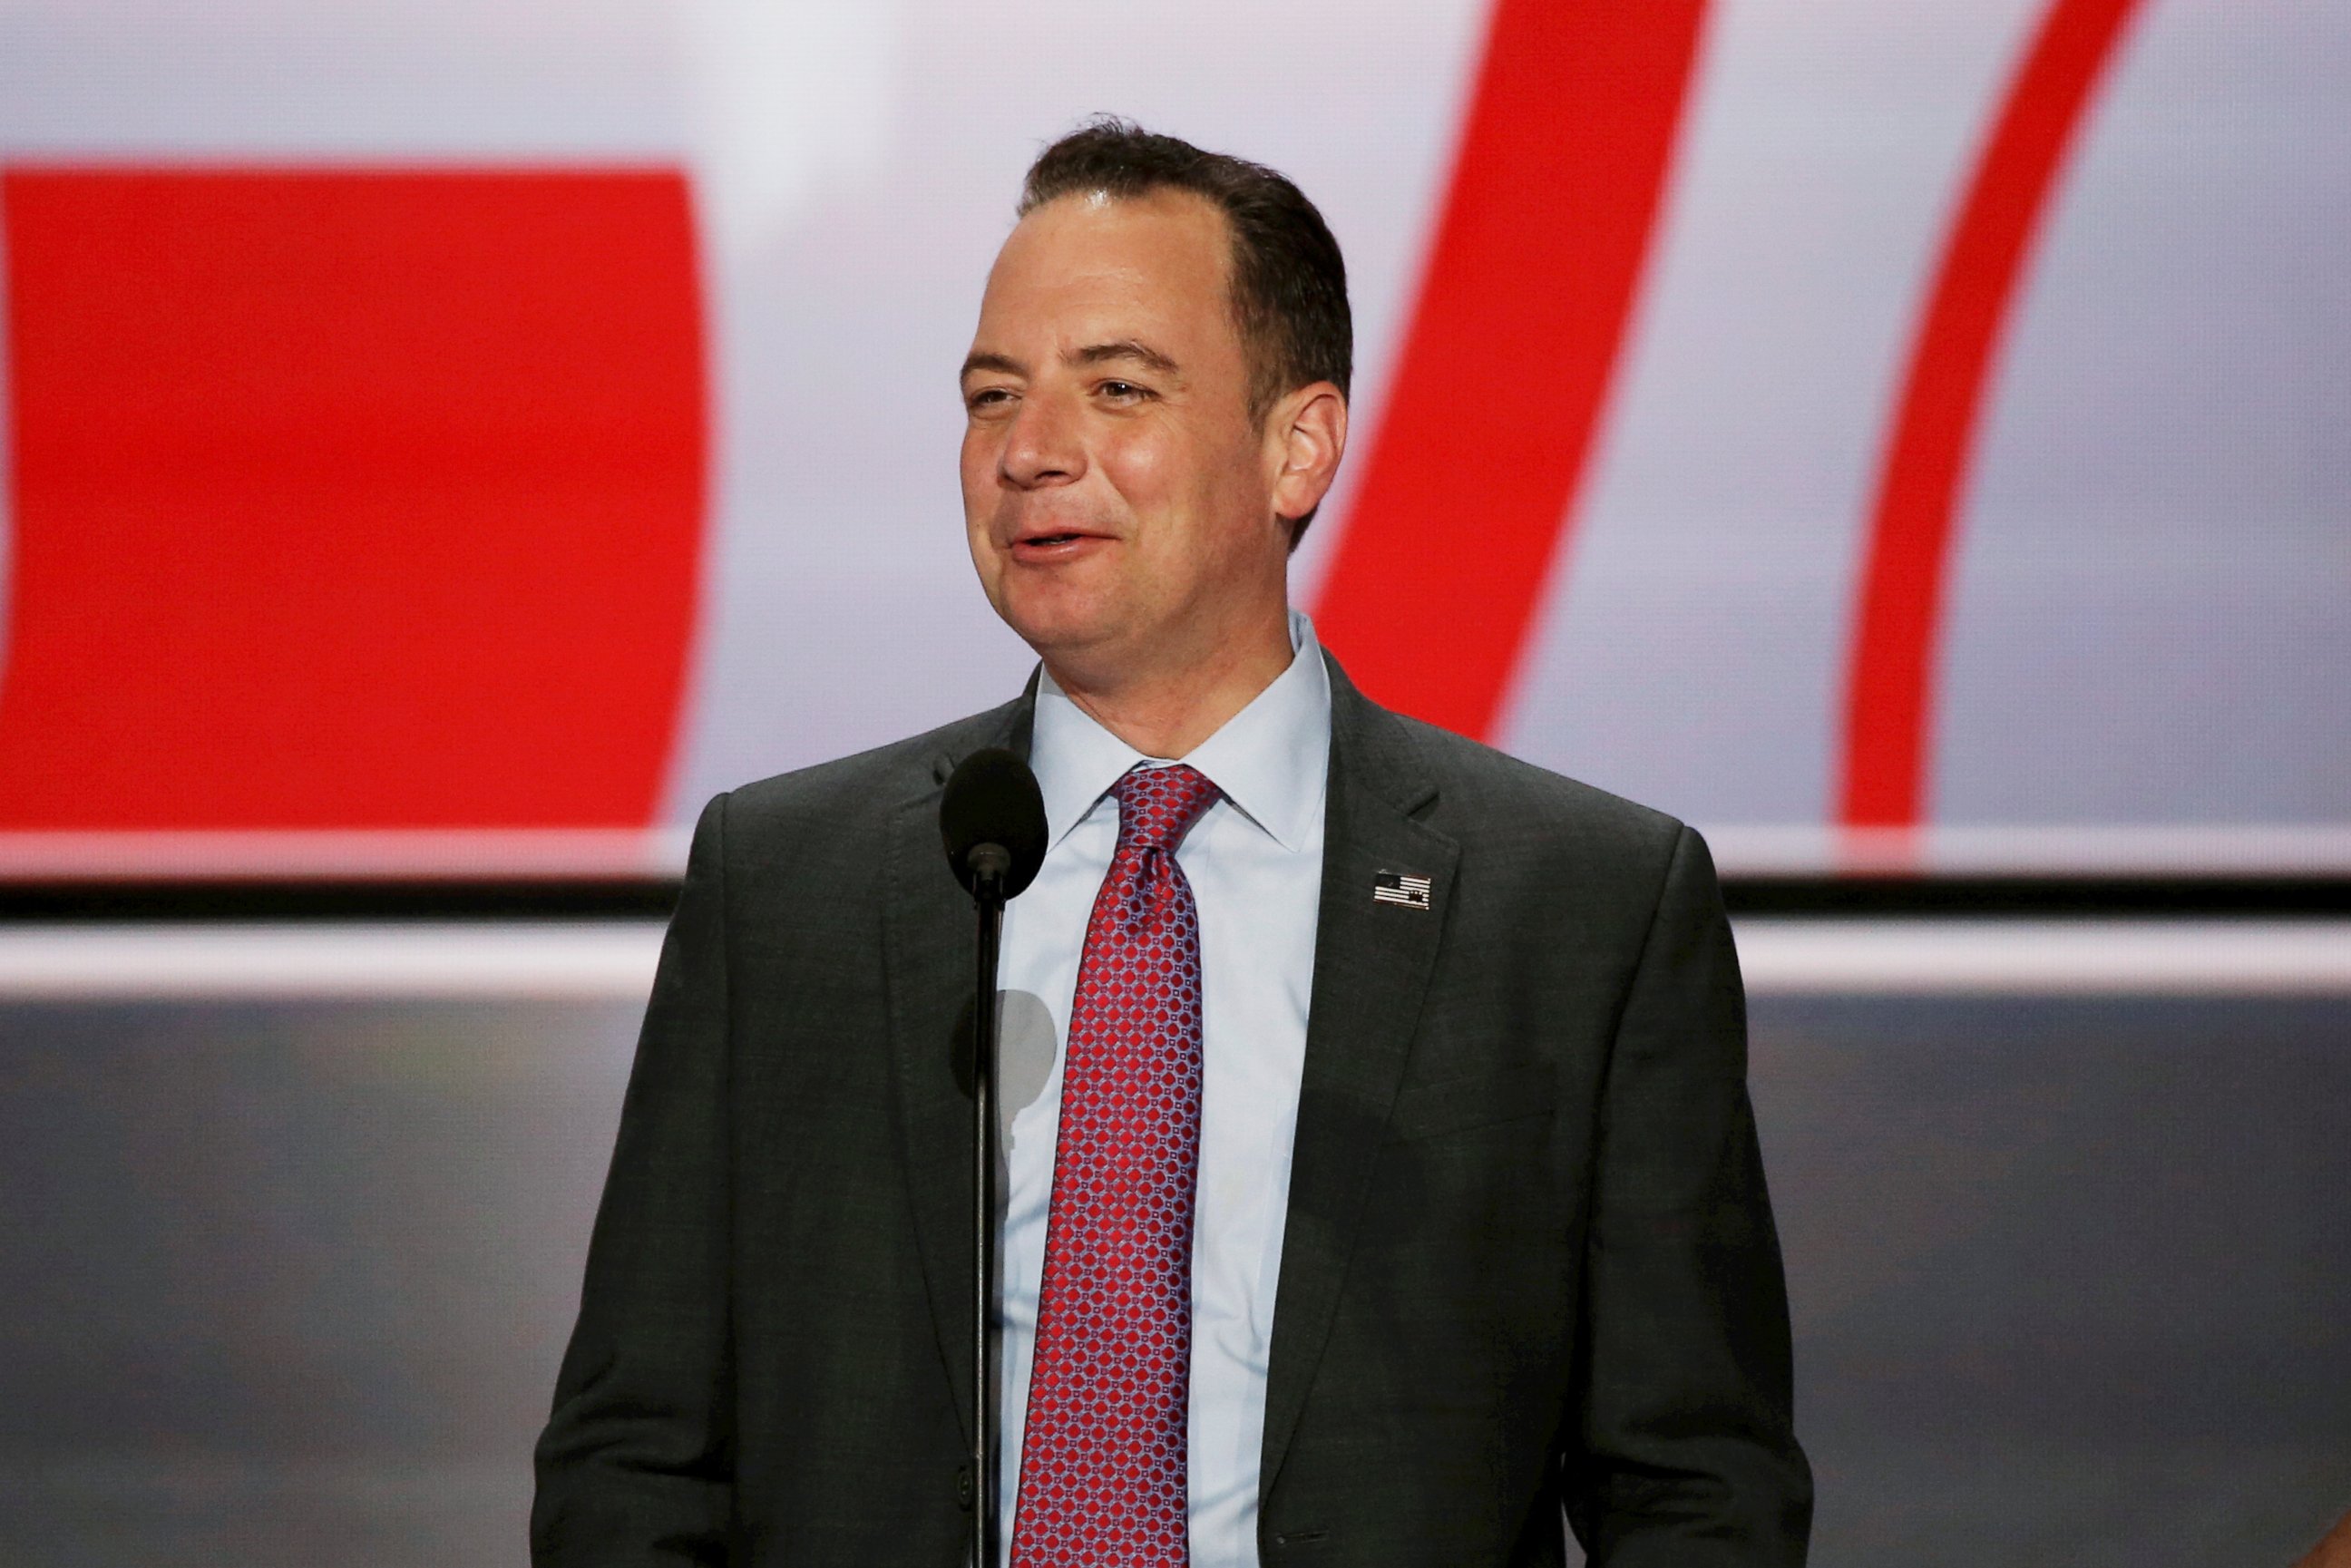 PHOTO: Reince Priebus, Chairman of the Republican National Committee was named as President-elect Donald Trump's chief of staff.